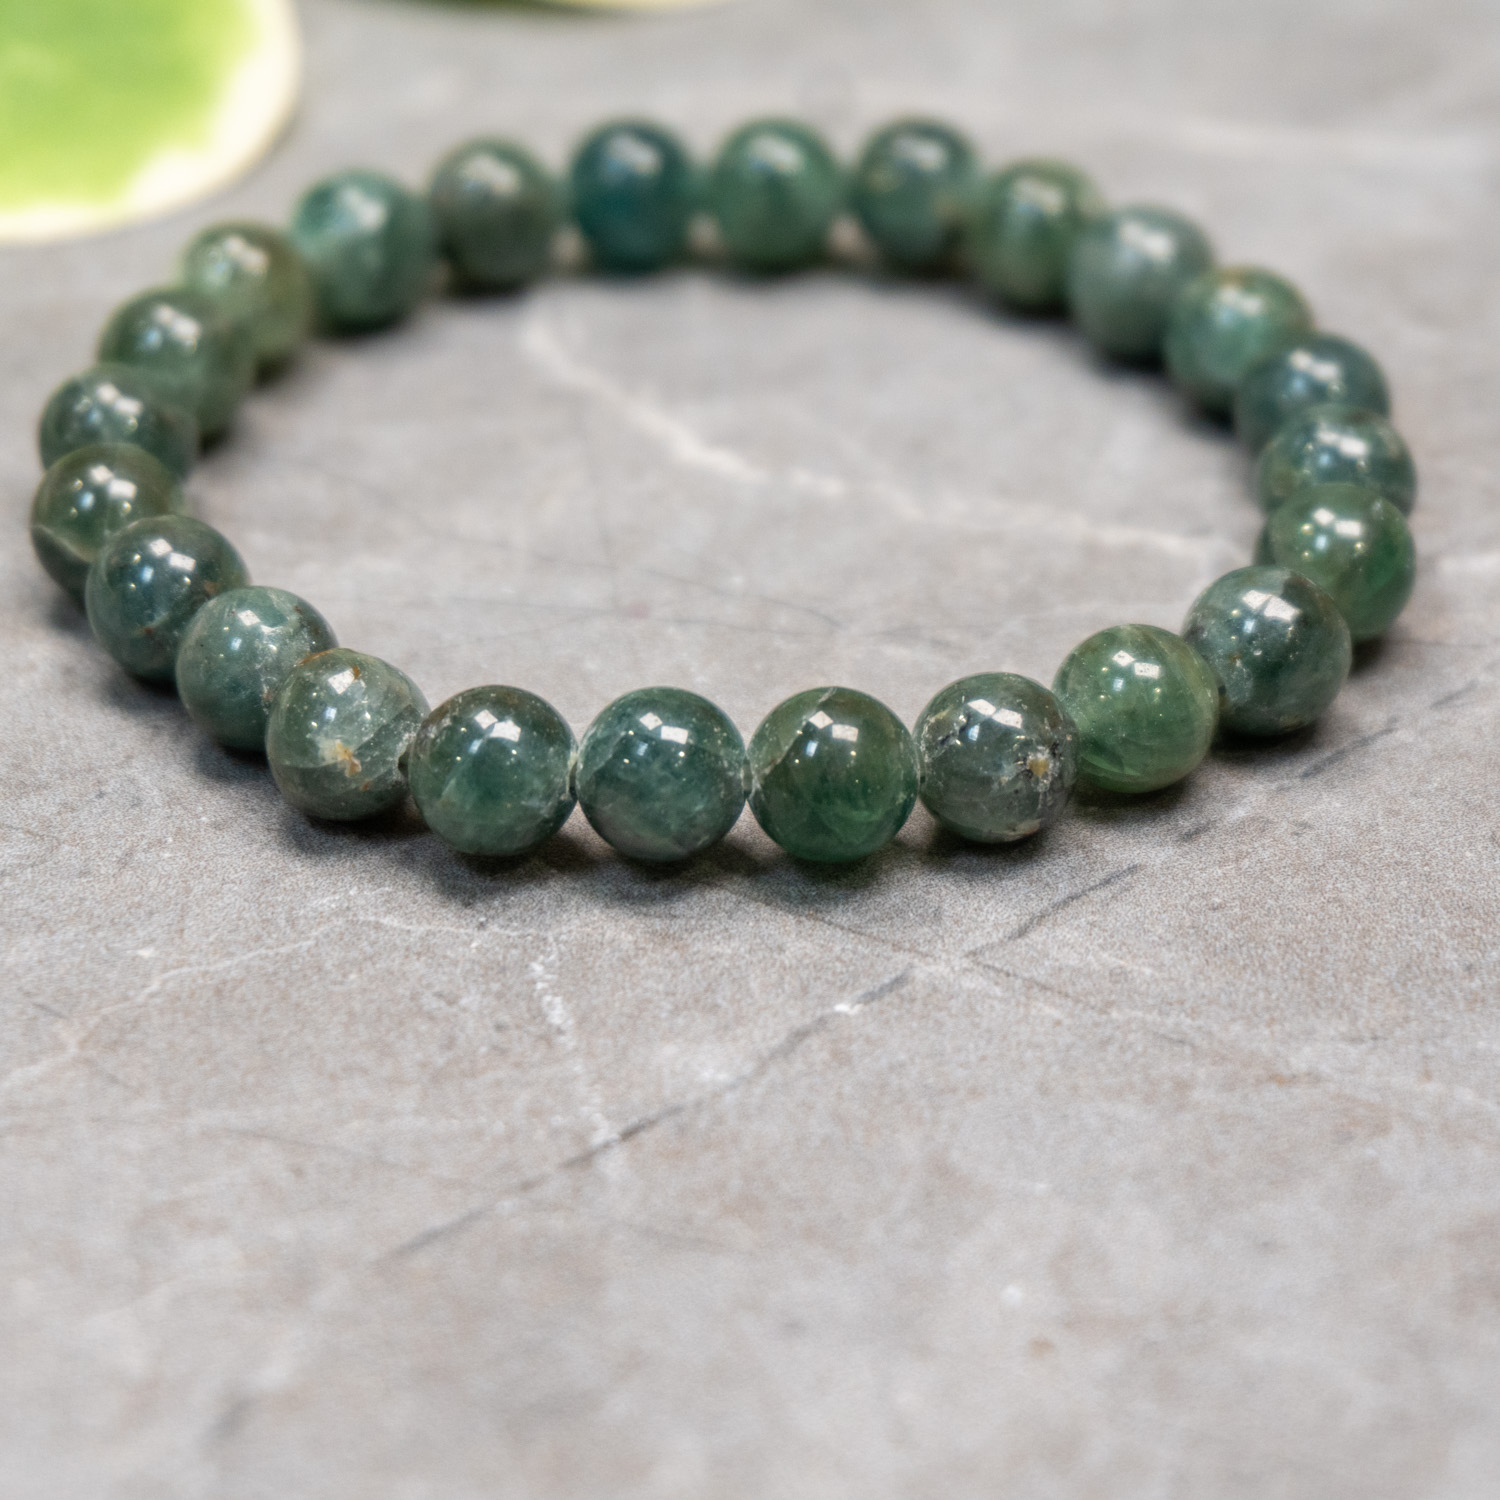 Green Apatite Bracelet - The Crystal Council